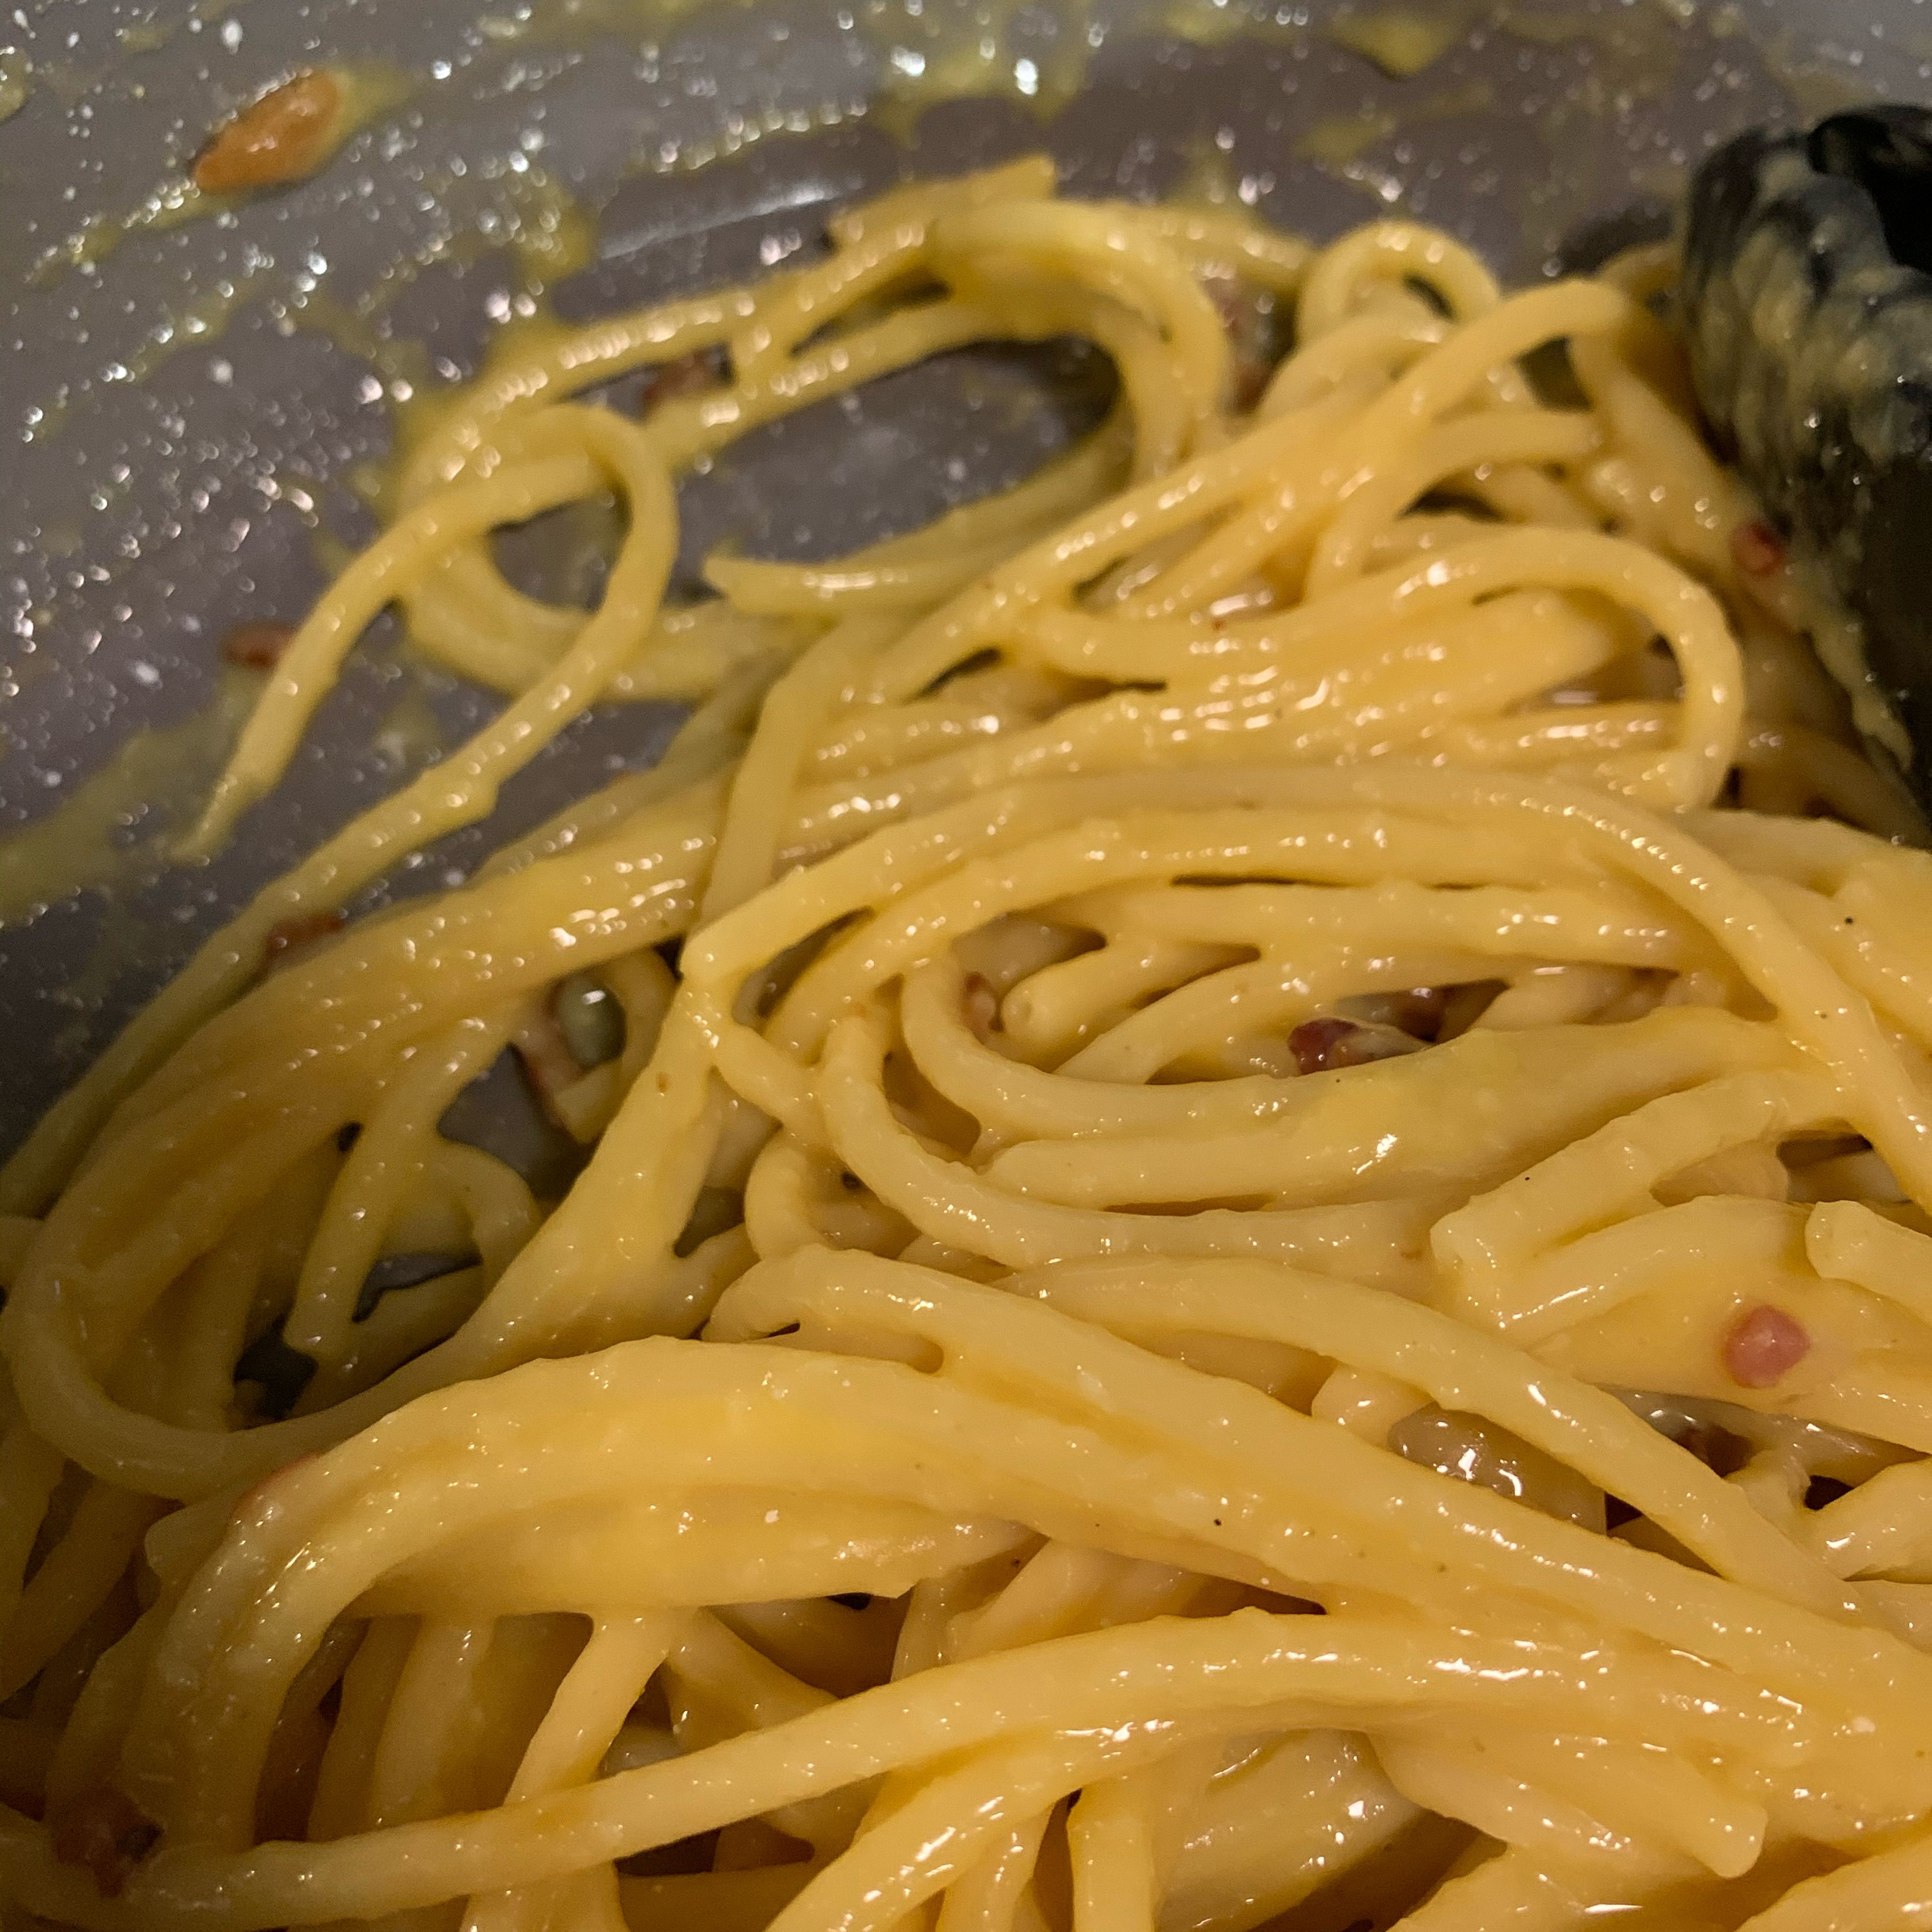 You want sauce to be smooth, not clumpy like mine is. Add very small amounts of left over pasta water until it is smooth.